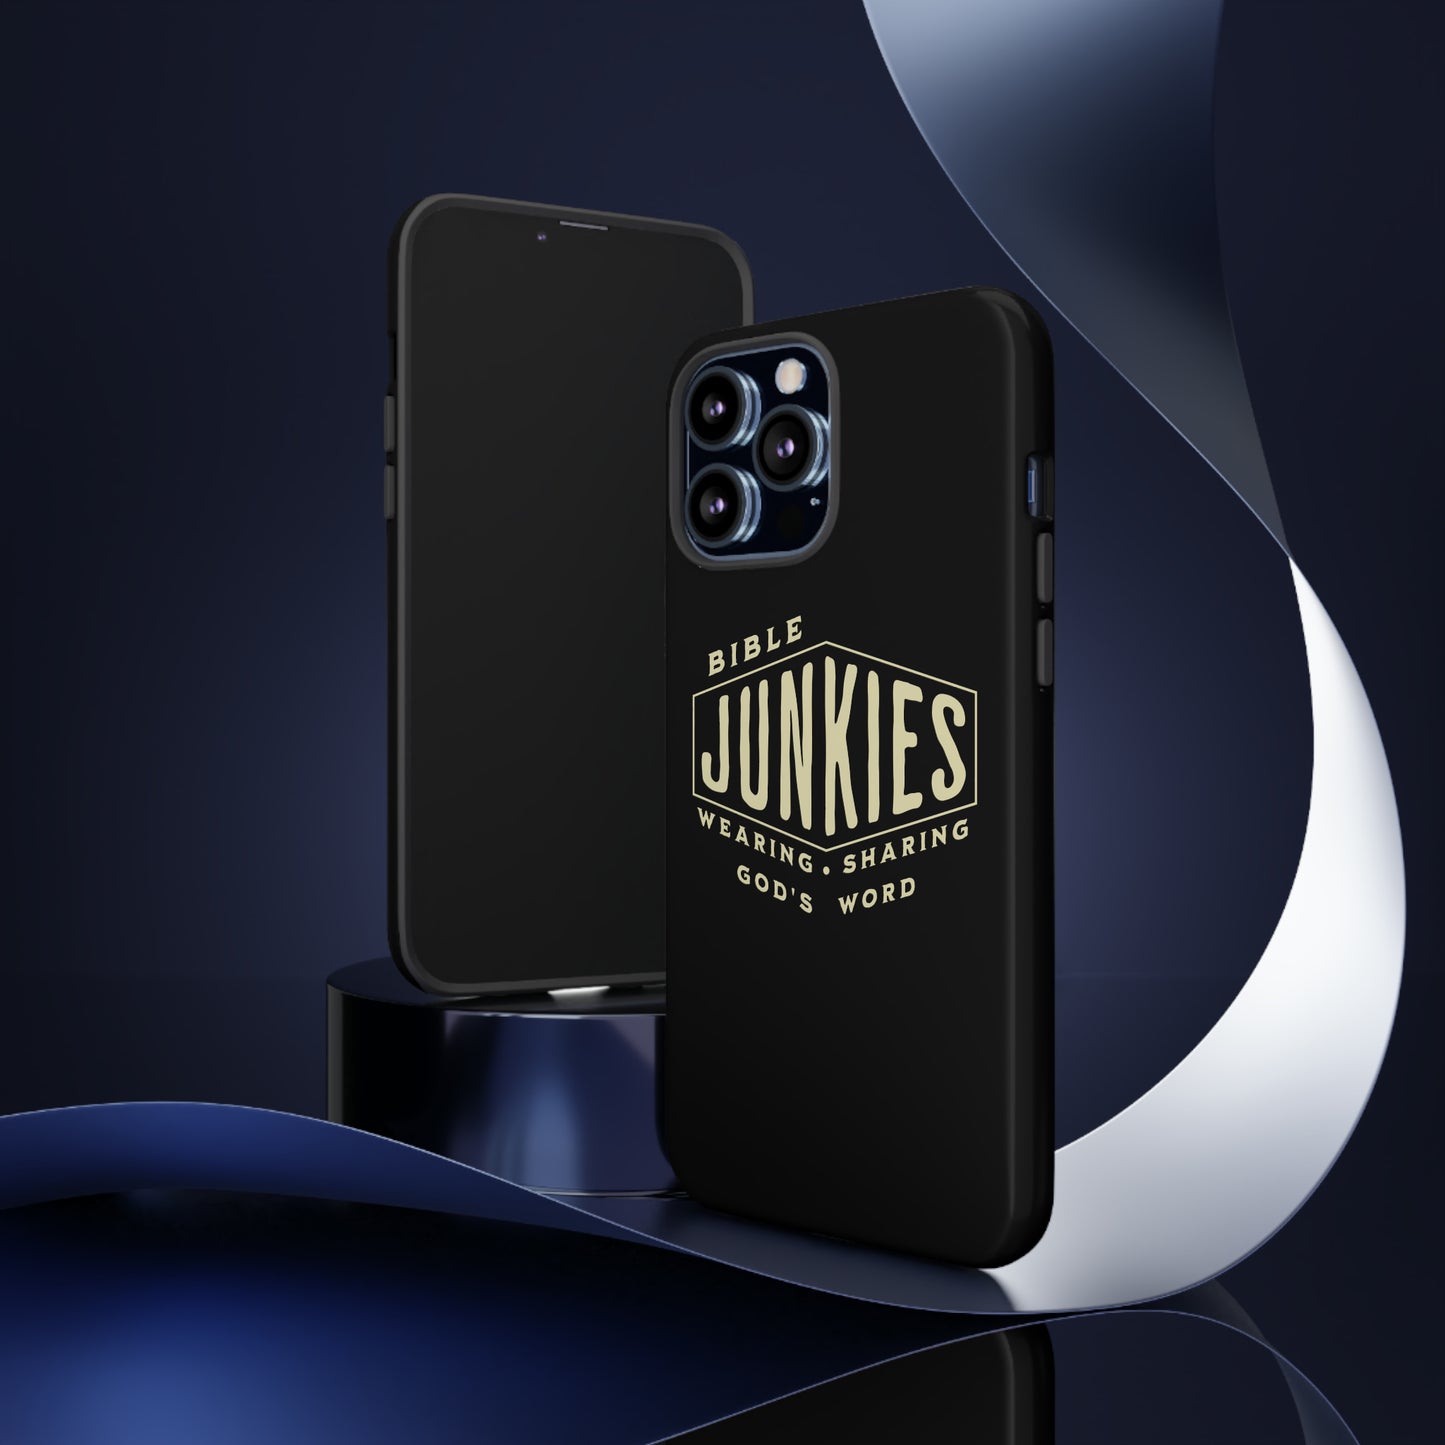 The Bible Junkies®, Cell Phone Case